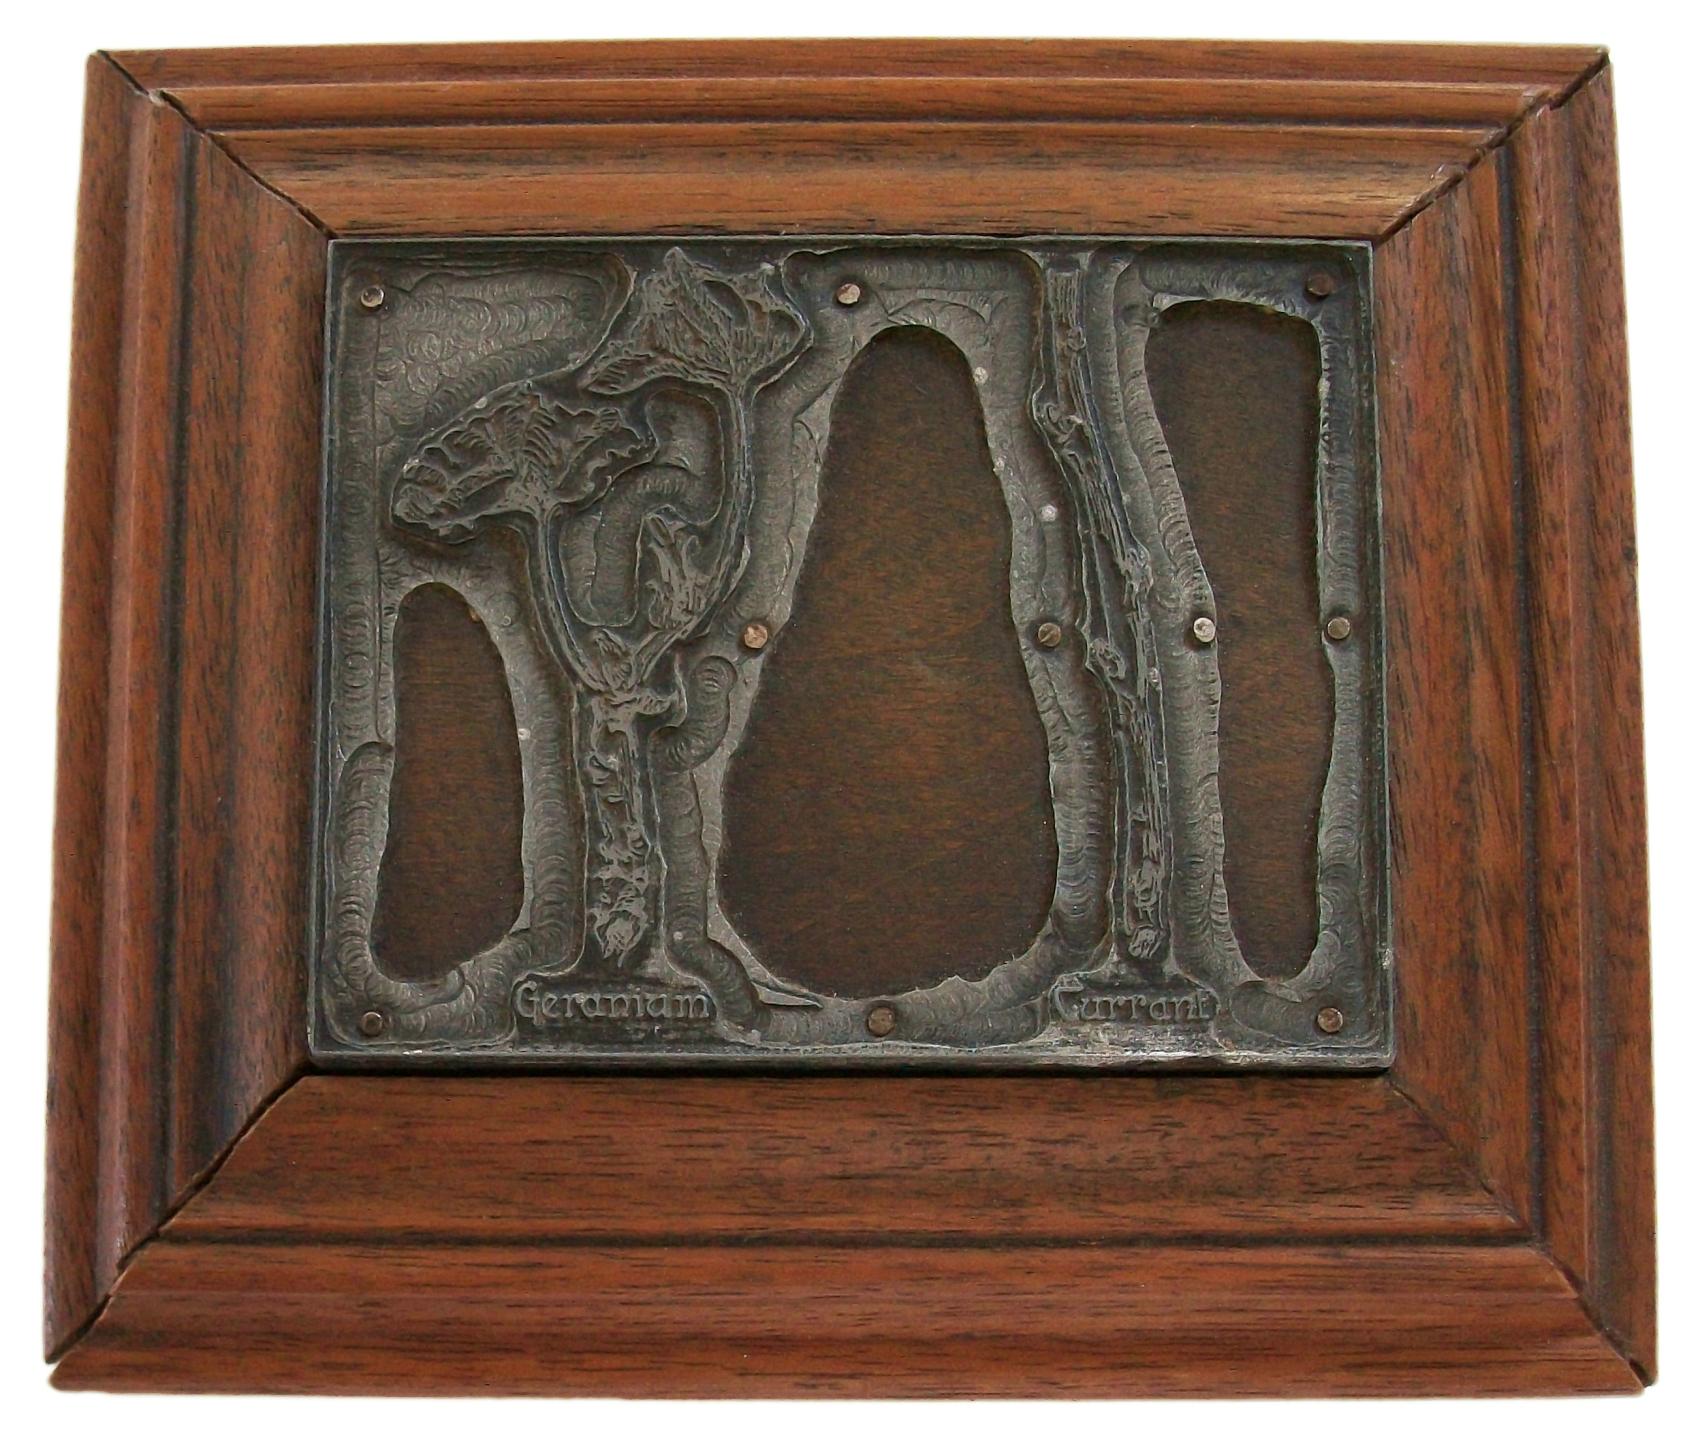 Antique Botanical Book Printing / Engraving Plate, Walnut Frame, 19th Century In Good Condition For Sale In Chatham, ON